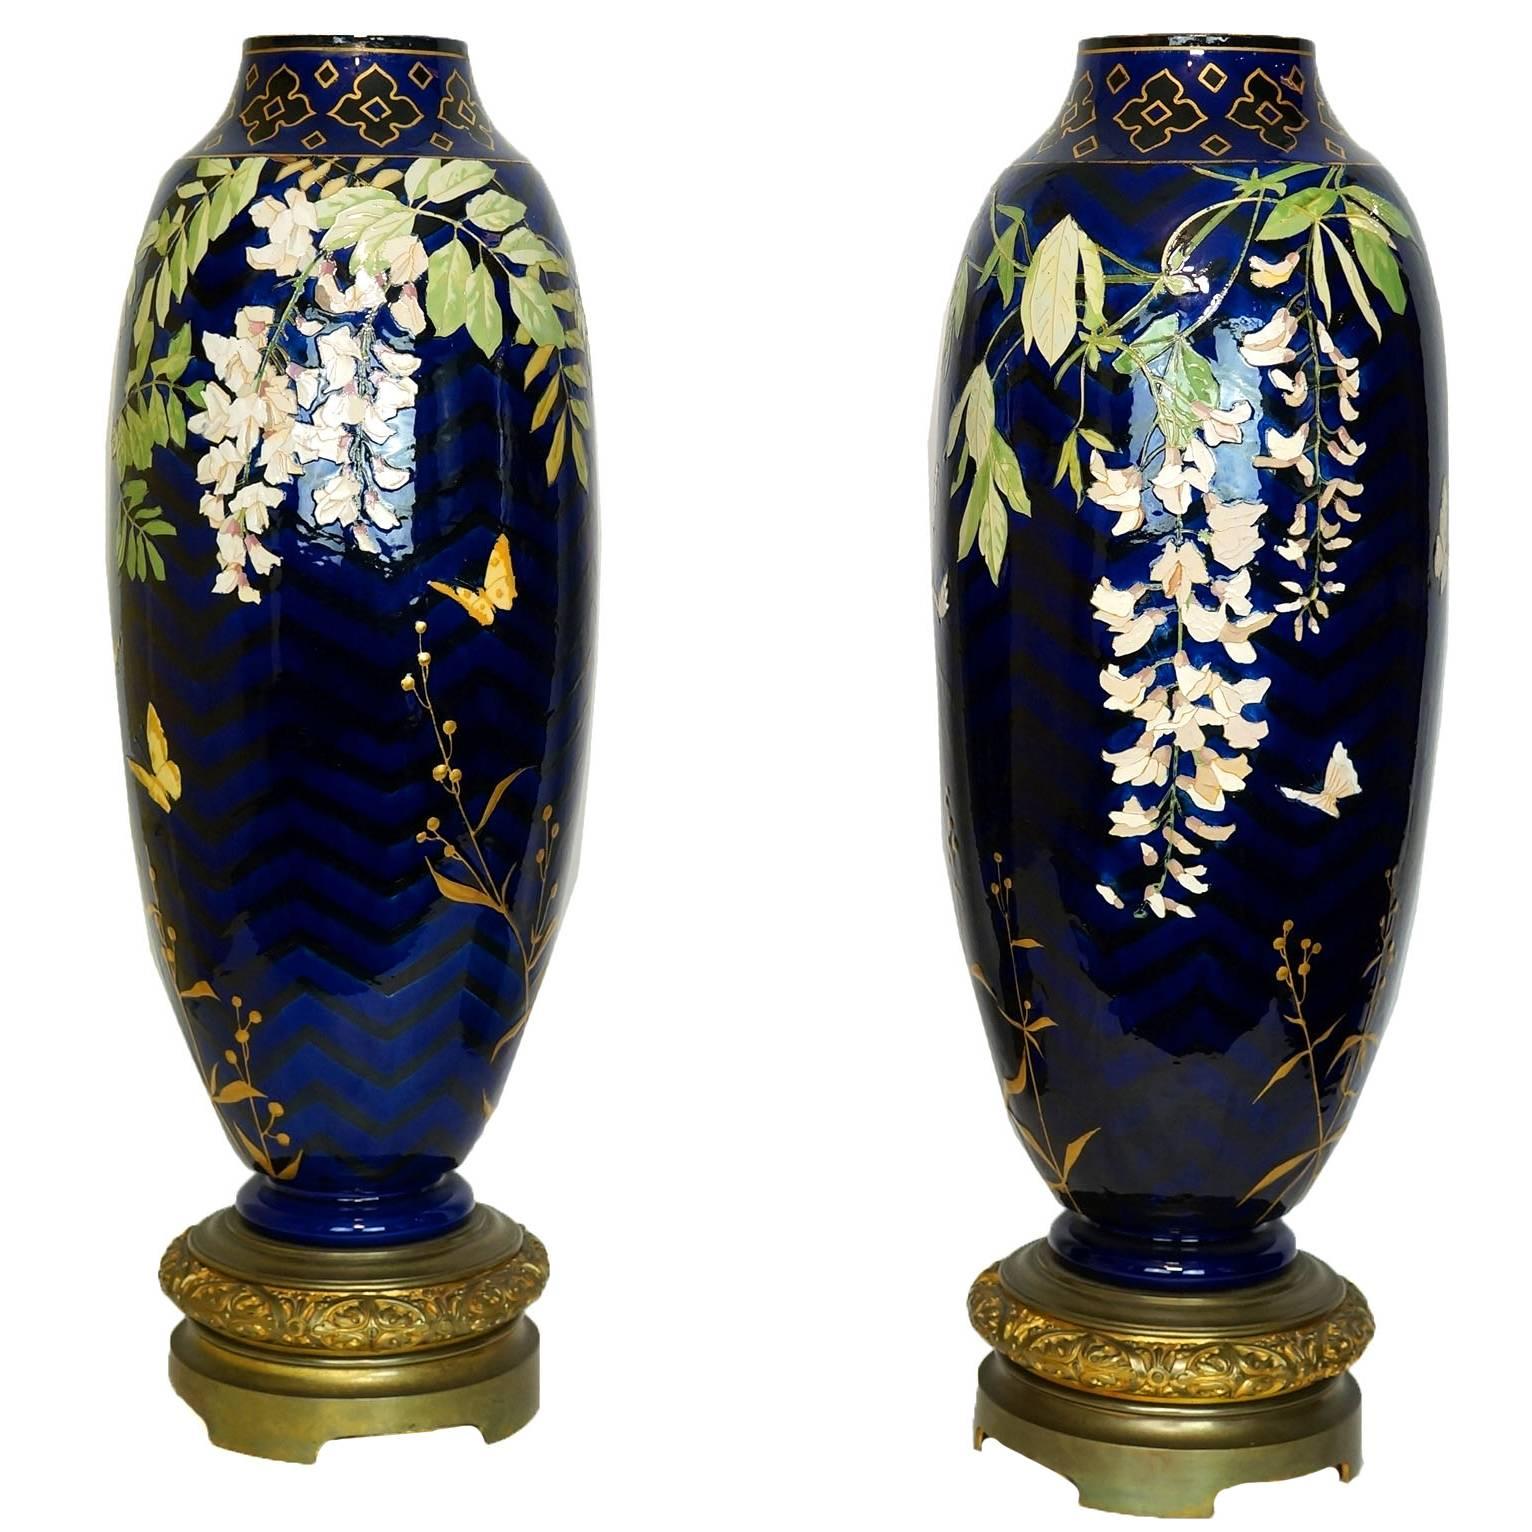 Tall Pair of Cobalt Blue Porcelain and Bronze Vases with Floral Decorations